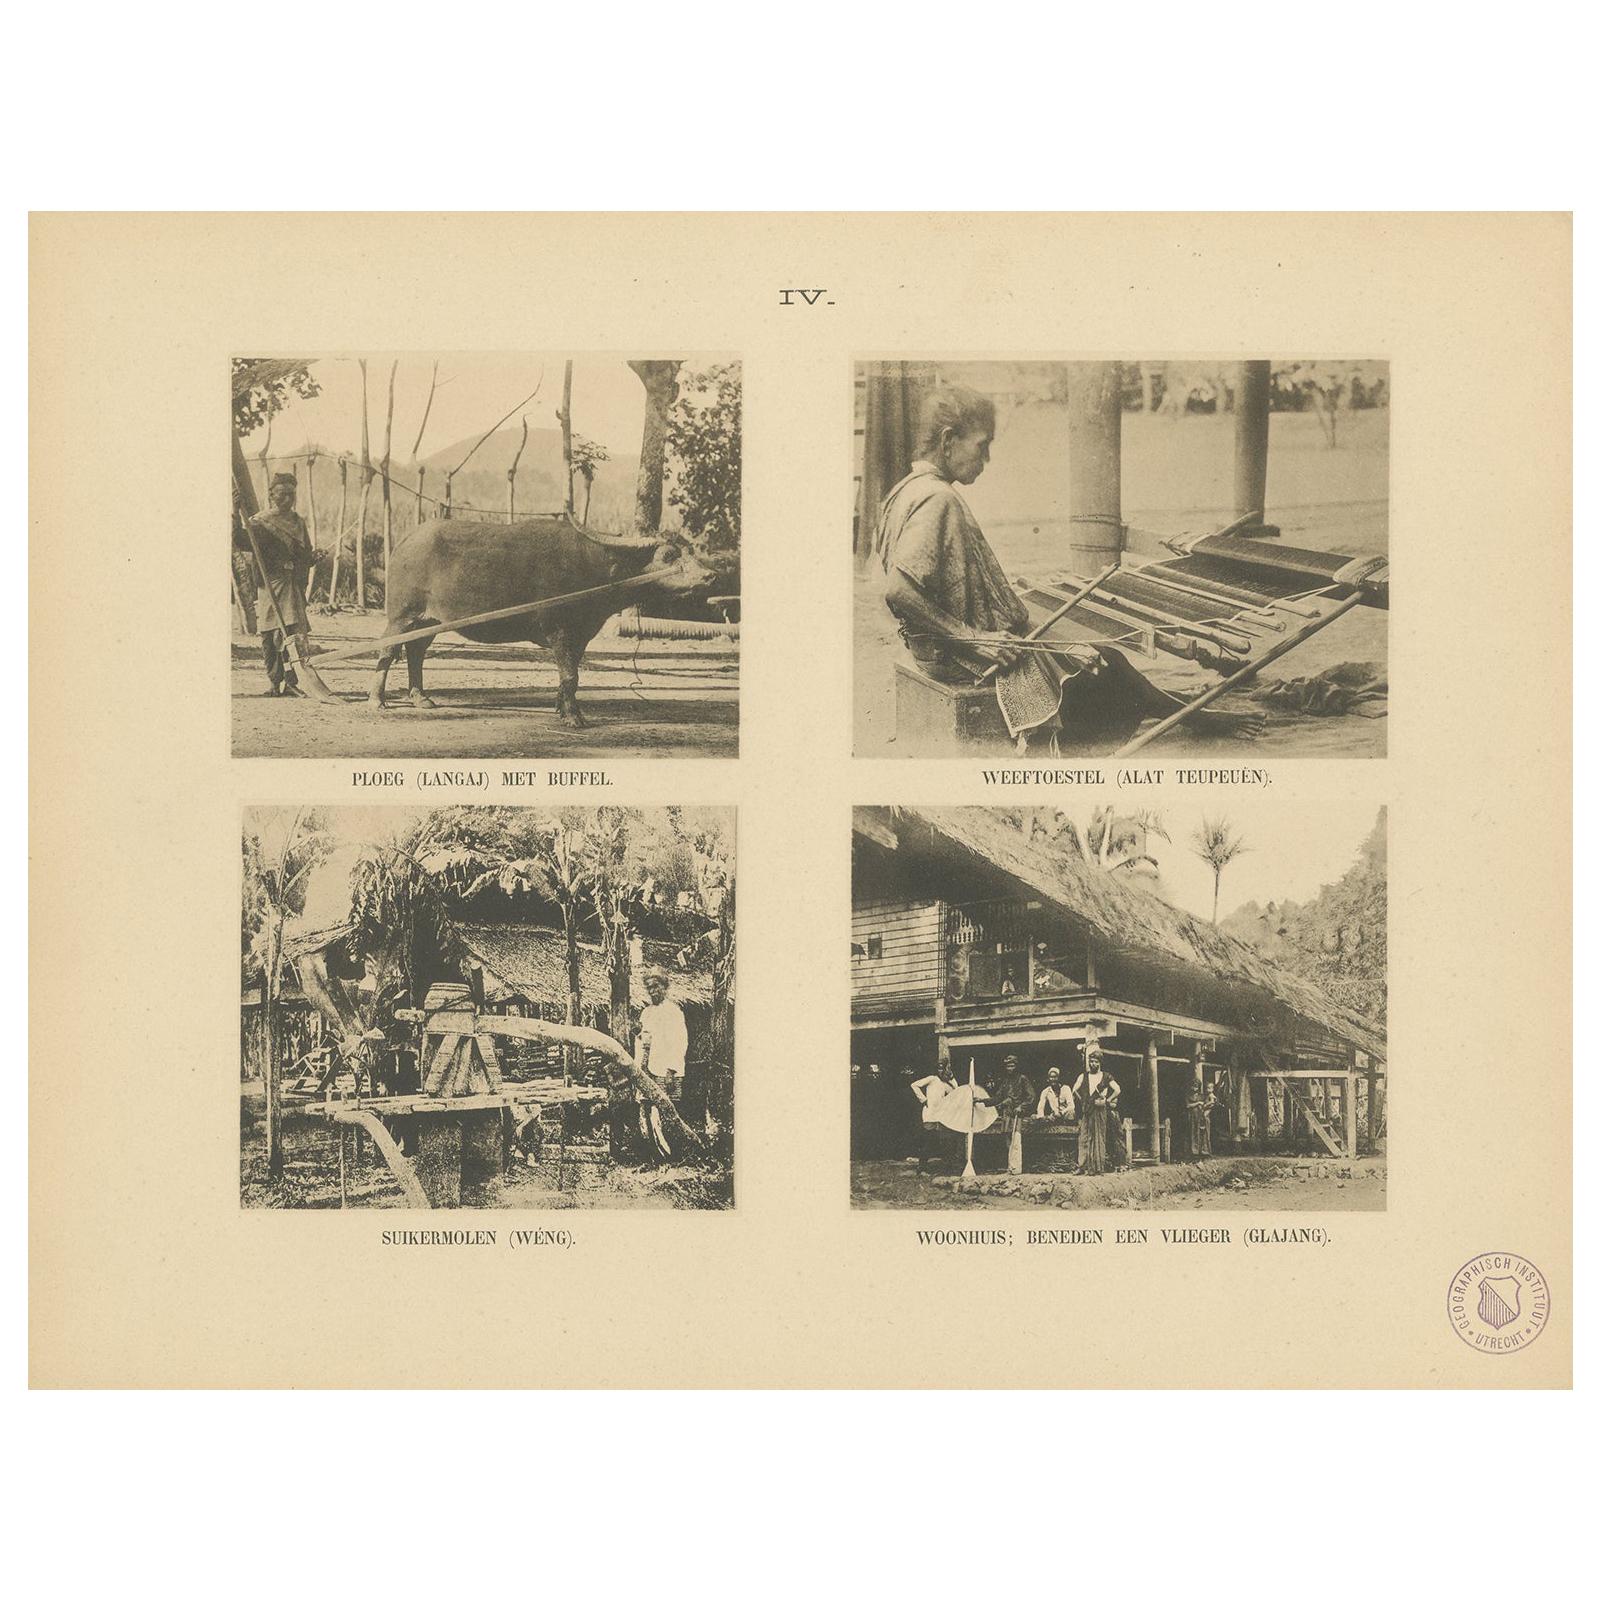 Twelve Prints of Aceh 'Atjeh' Published by E.J. Brill, '1895'